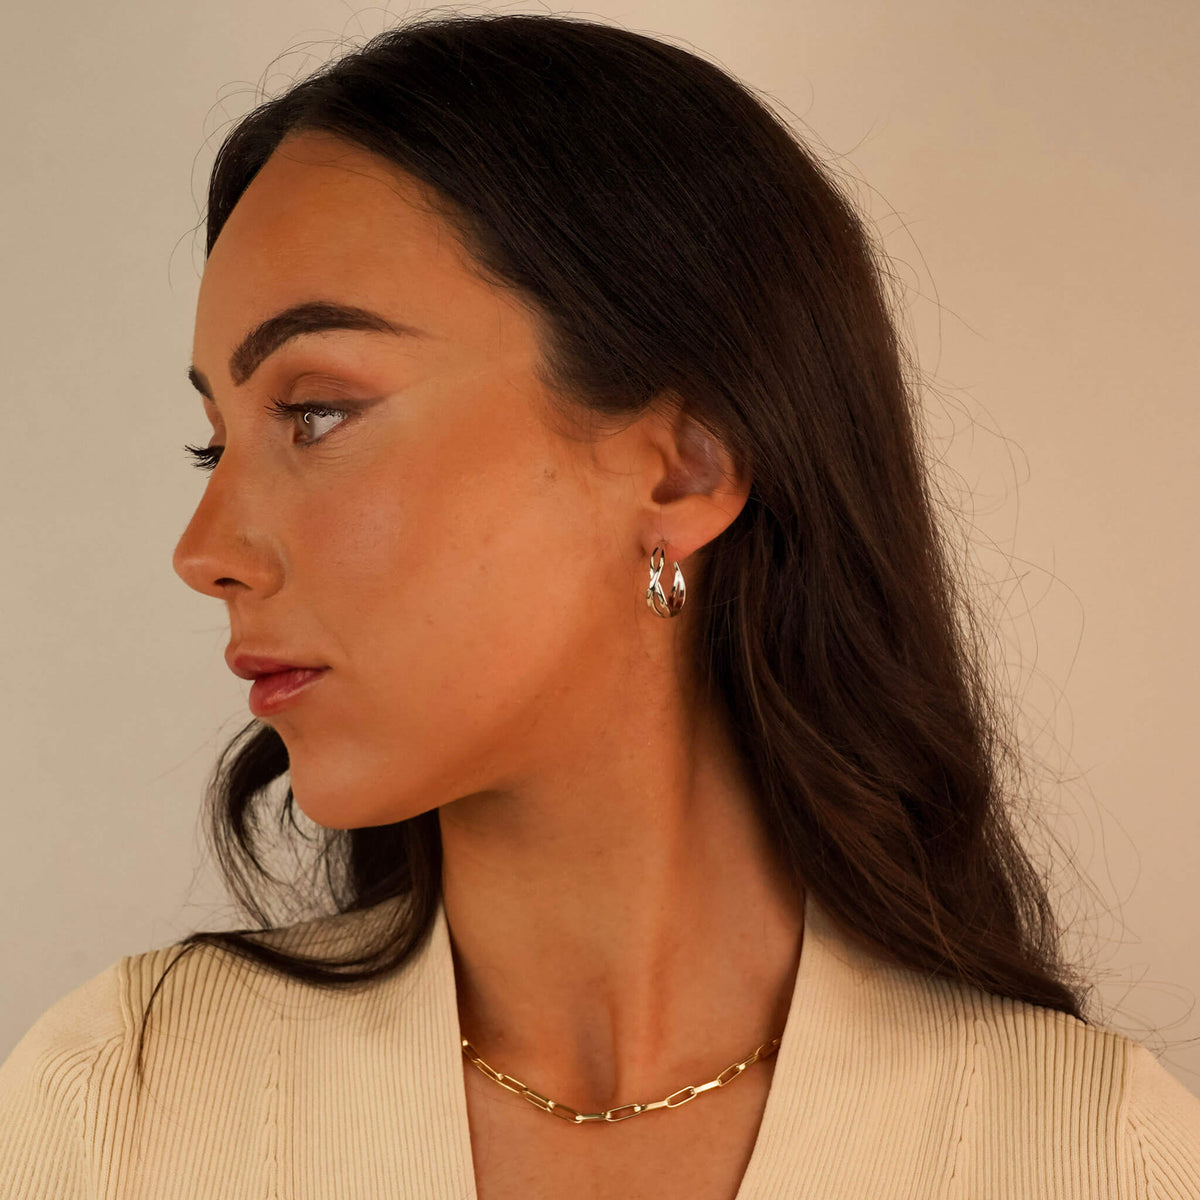 silver hoop earring with a celtic design. They are called the Fianna Earrings and they are inspired by Irish heritage. The Fianna earrings are photographed on a model.